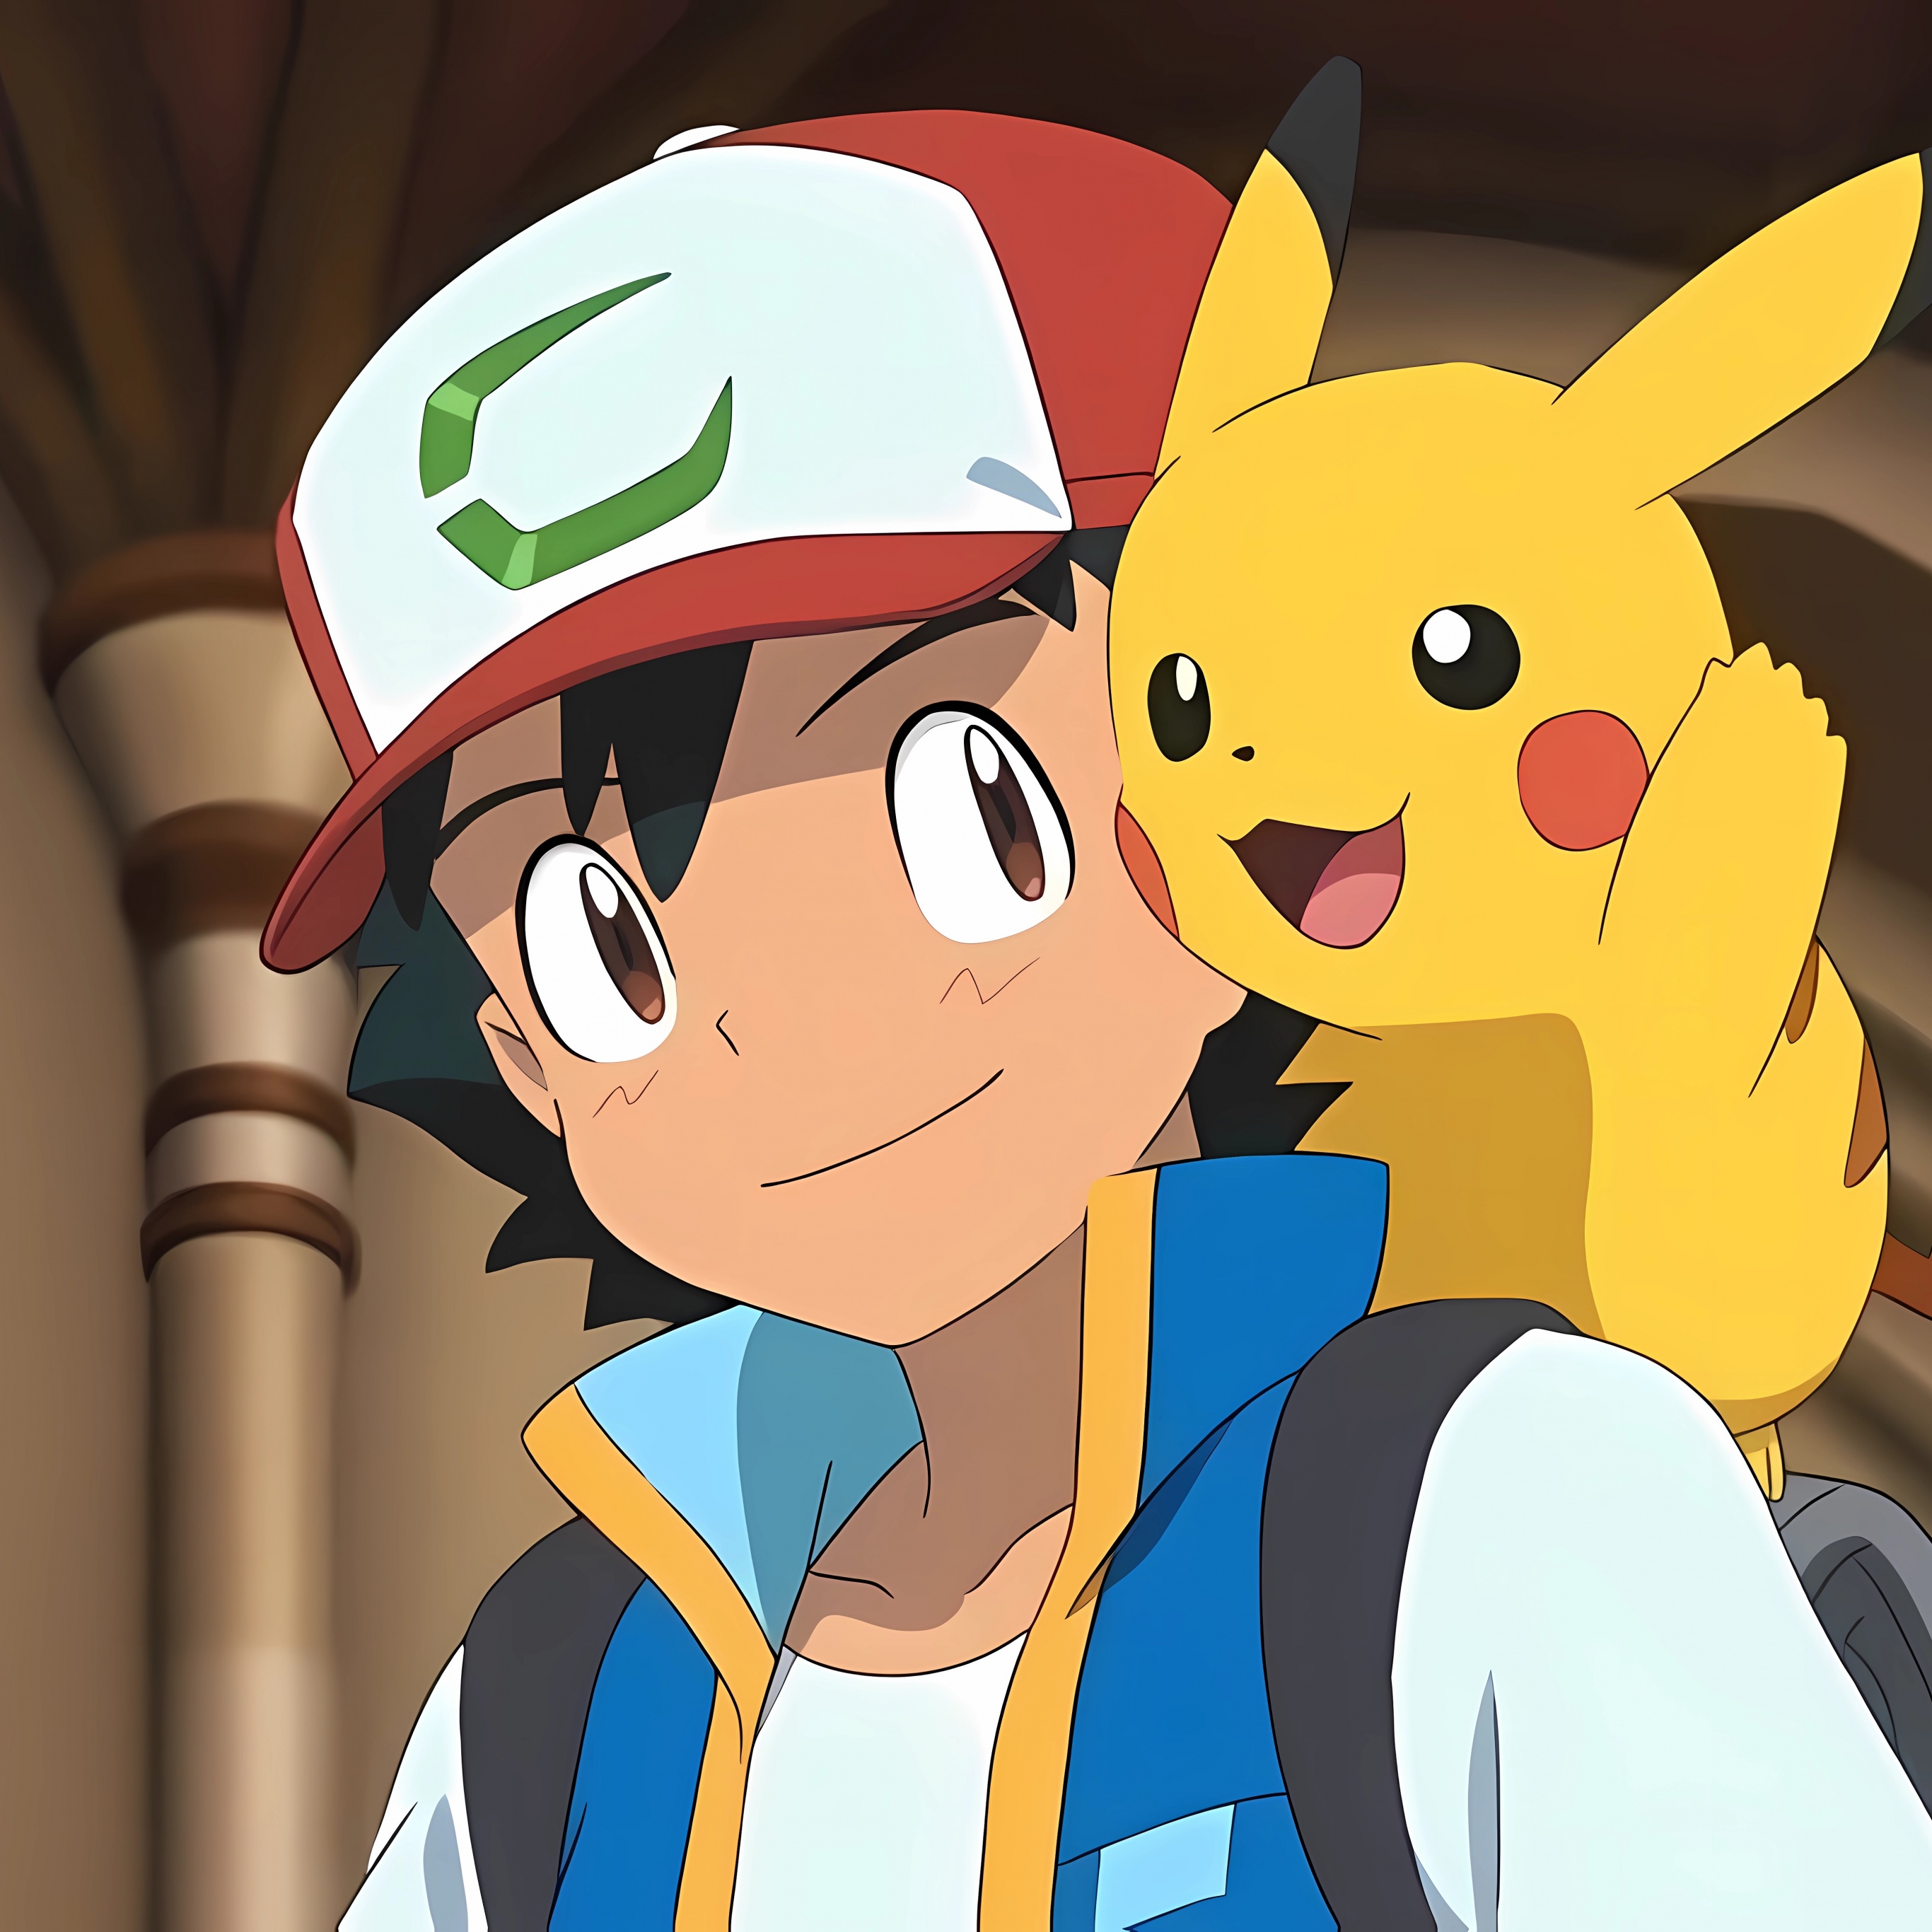 New Pokémon anime will end Ash Ketchum's story after 25 years | EW.com